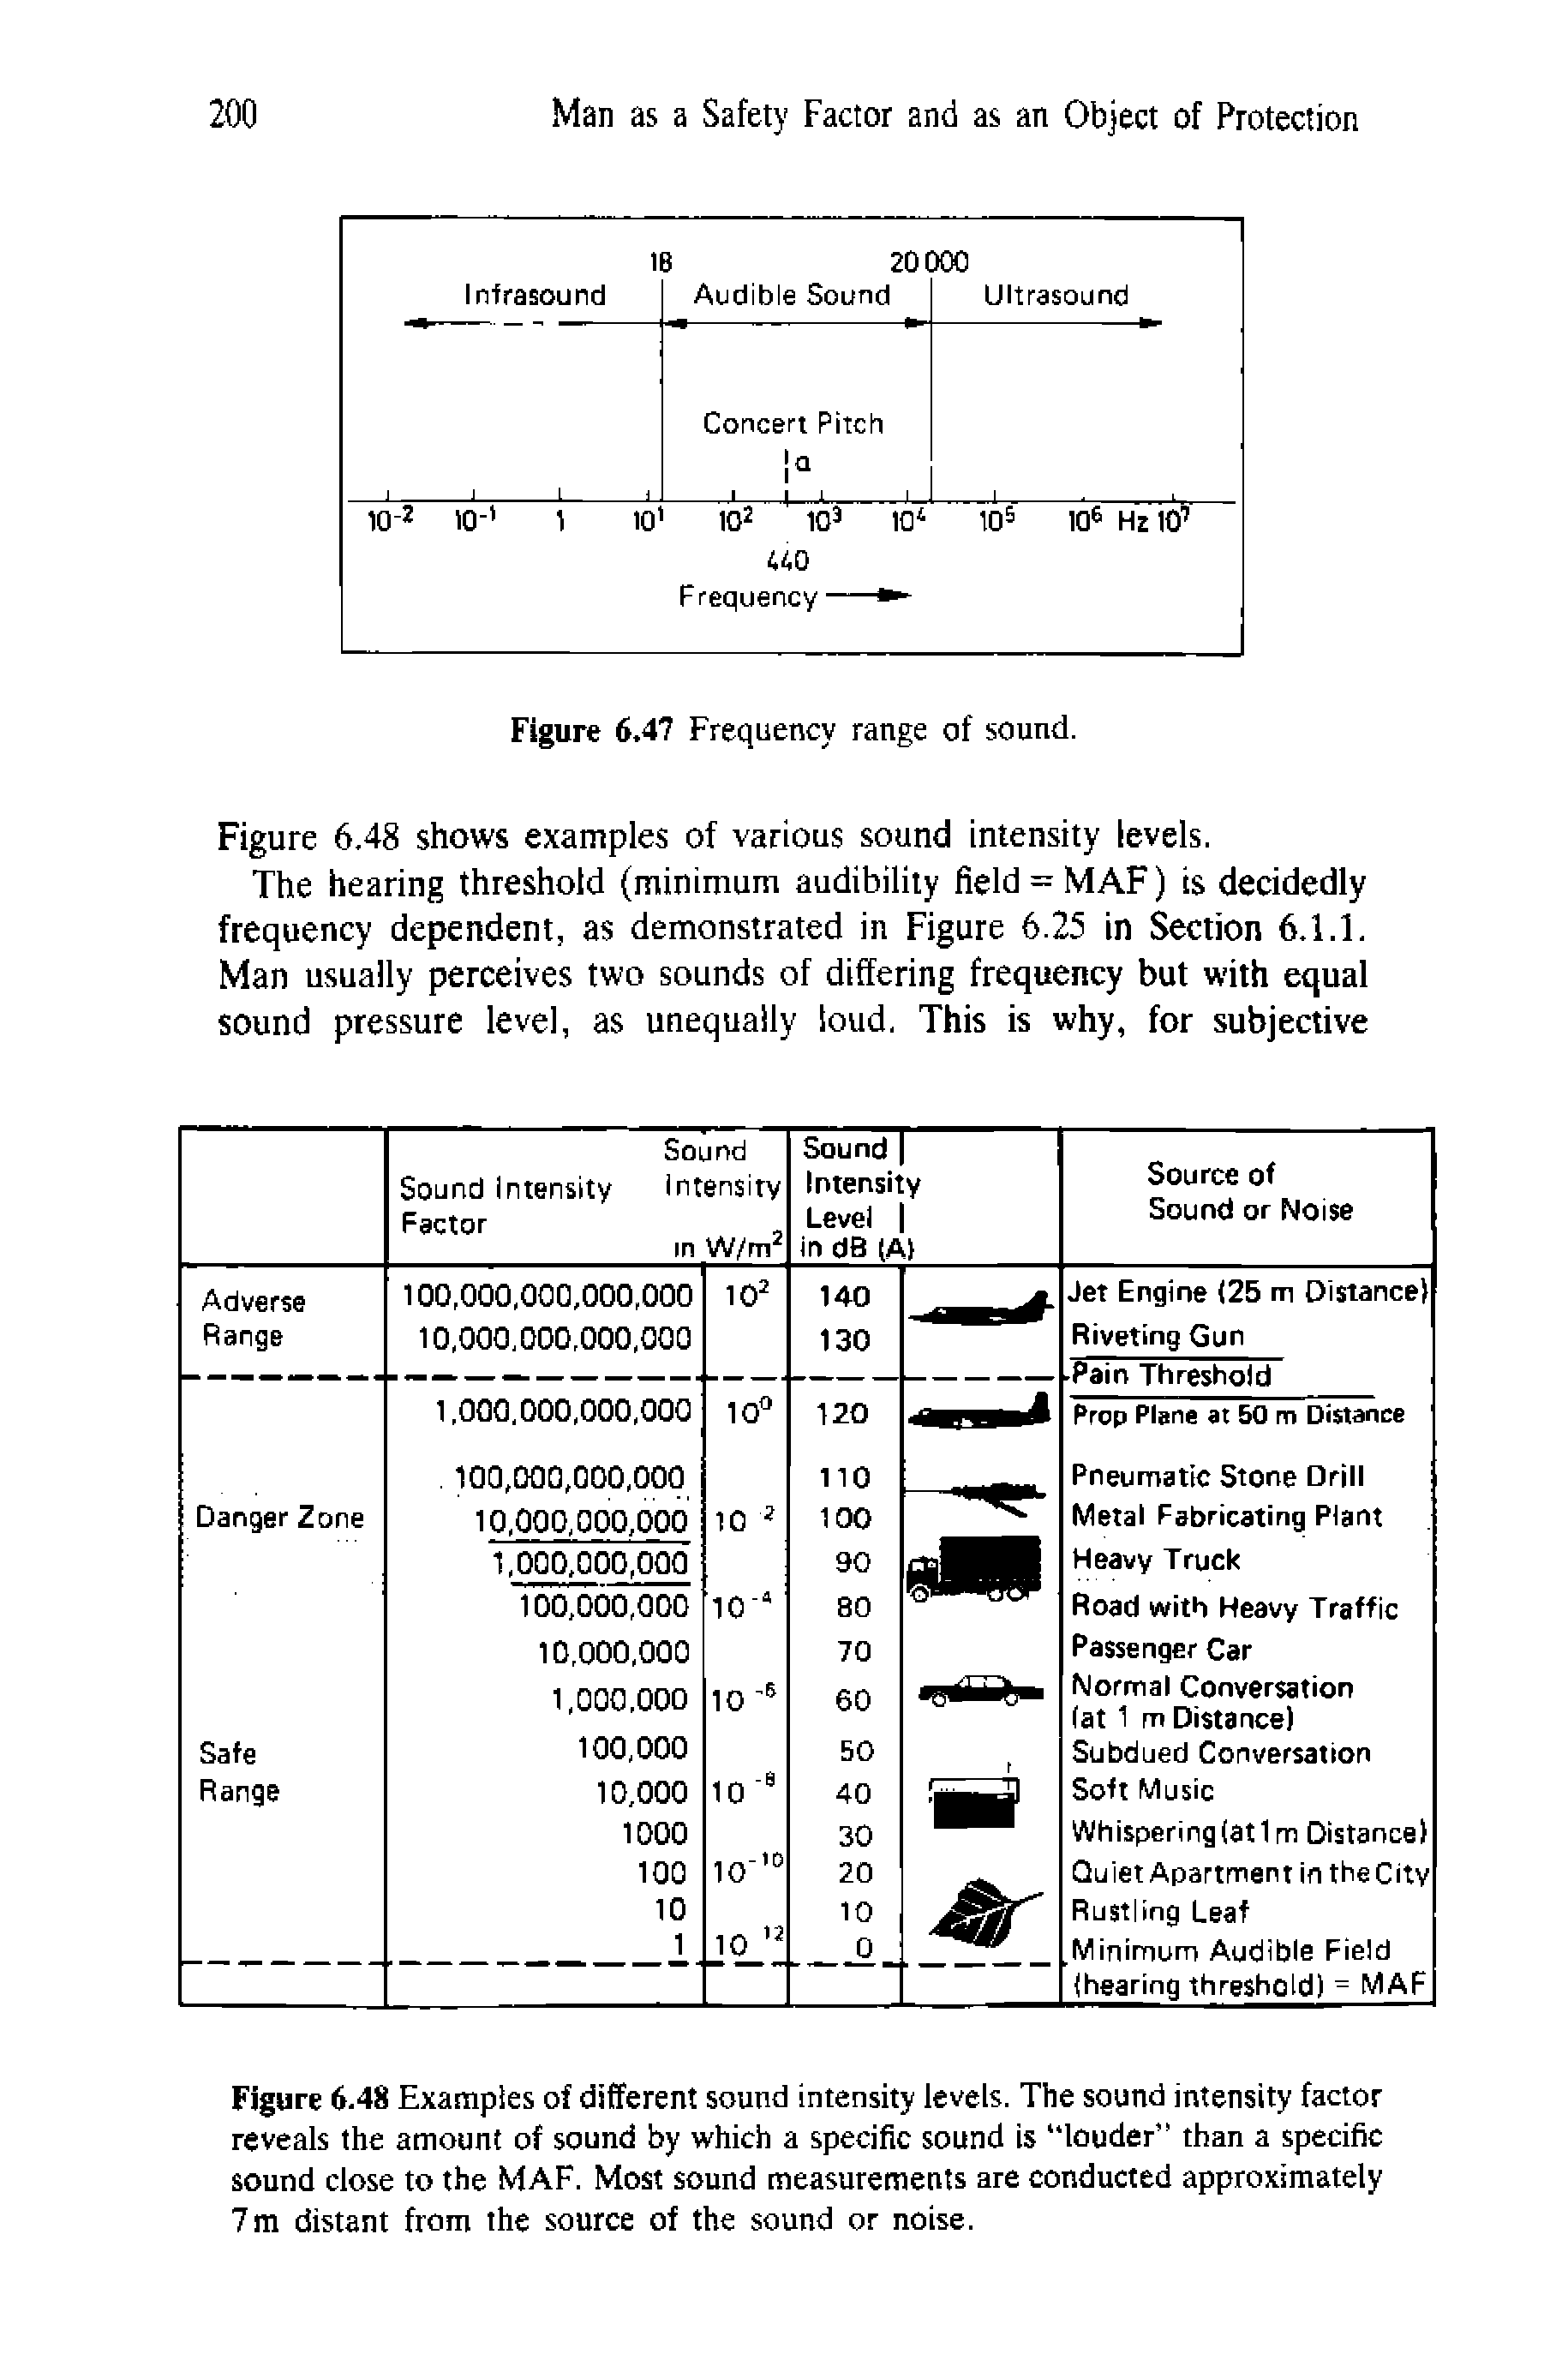 Figure 6.48 Examples of different sound intensity levels. The sound intensity factor reveals the amount of sound by which a specific sound is louder than a specific sound close to the MAF. Most sound measurements are conducted approximately 7m distant from the source of the sound or noise.